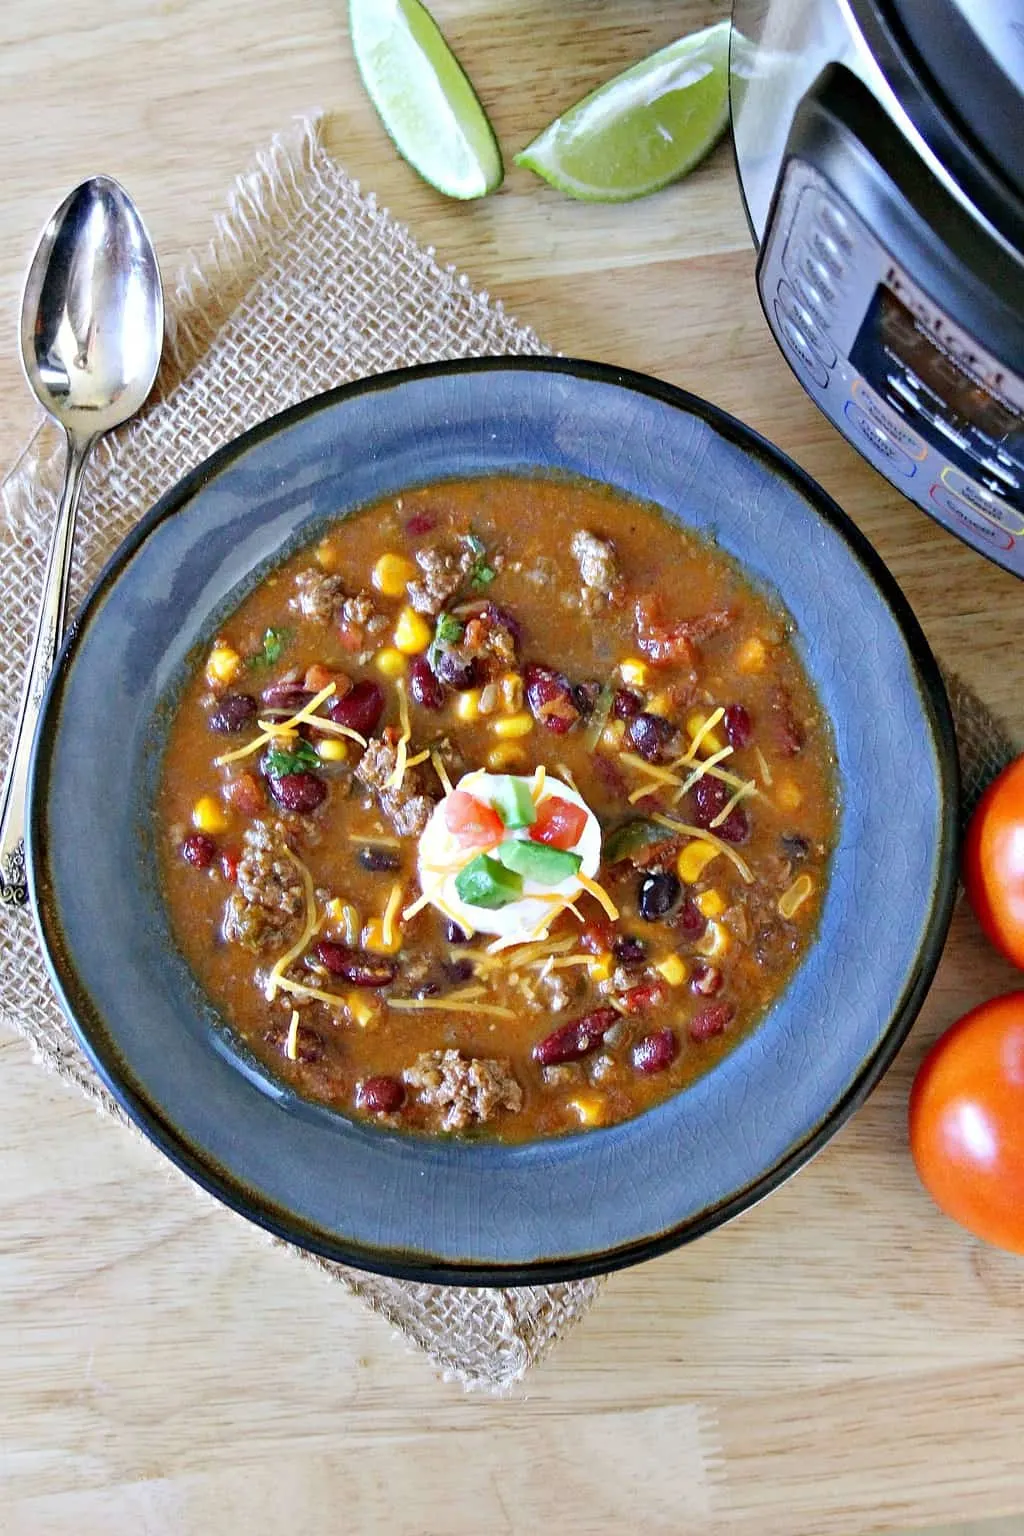 Healthy taco soup is a quick and easy weeknight dinner. This Instant Pot spicy taco soup could not be more delicious. The whole family will love it...they'll have no clue that it's totally Weight Watchers friendly! 